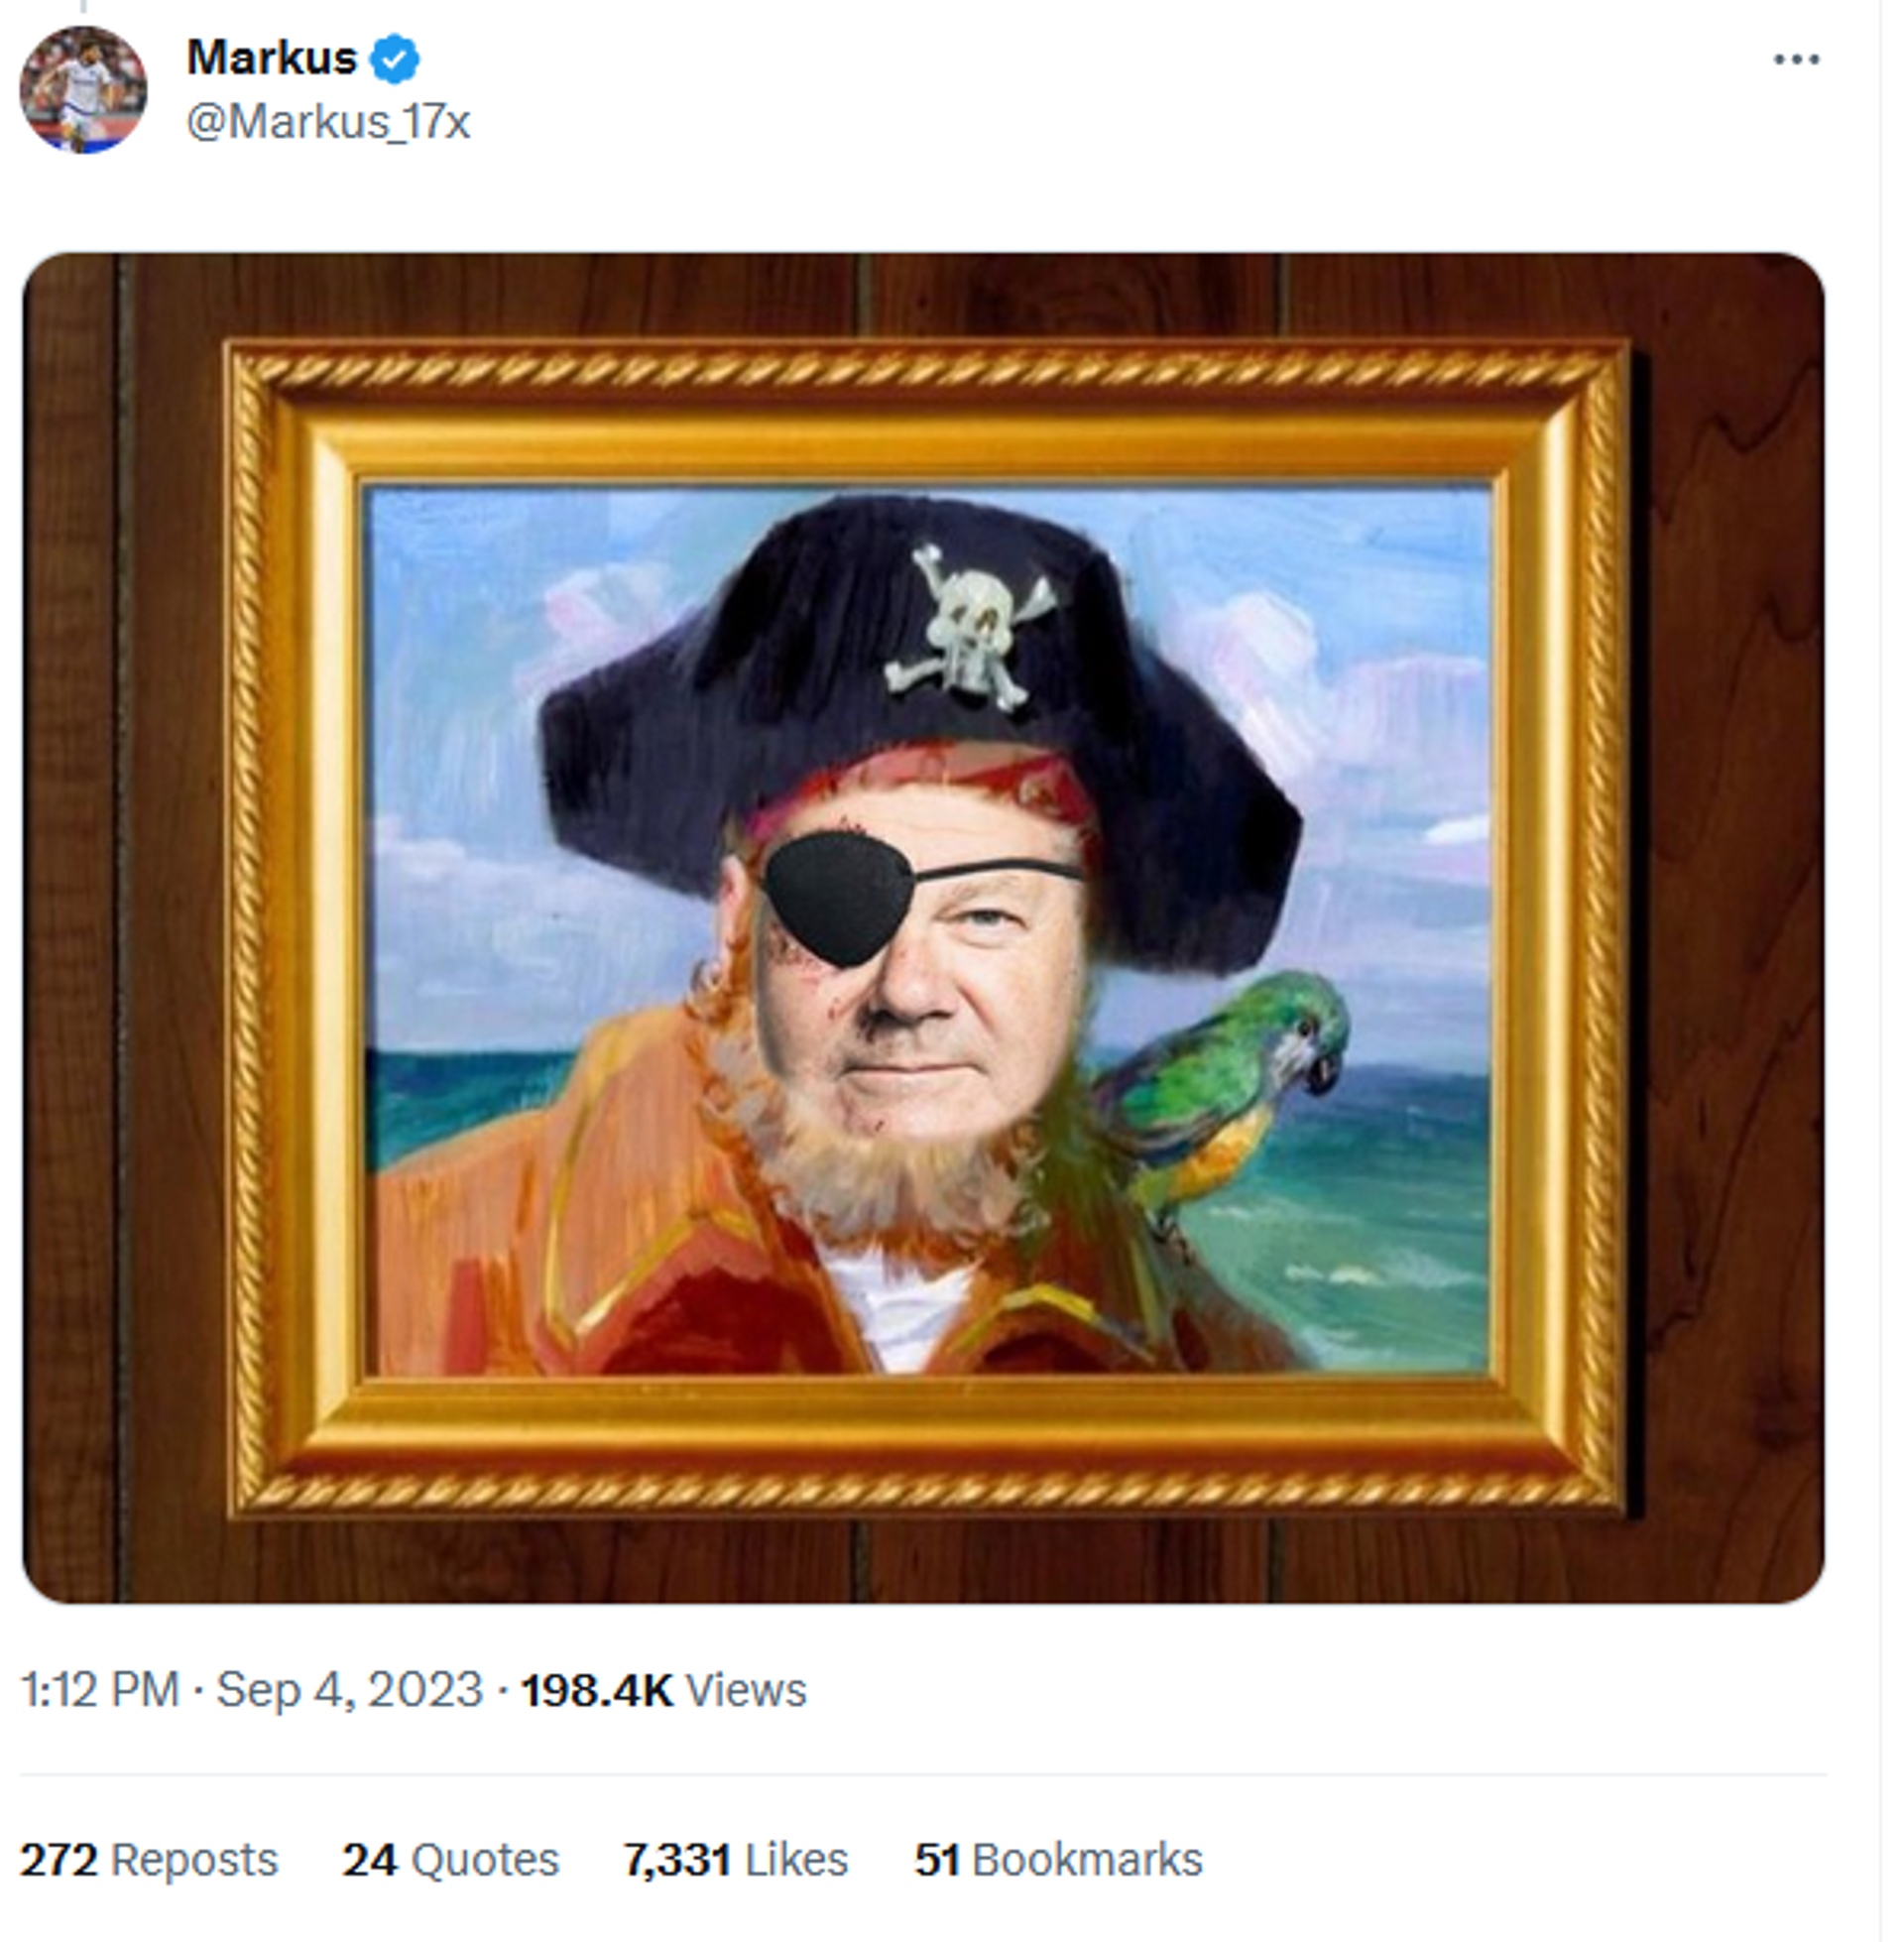 German Chancellor Olaf Scholz as the pirate from the intro to Spongebob Squarepants. - Sputnik International, 1920, 04.09.2023